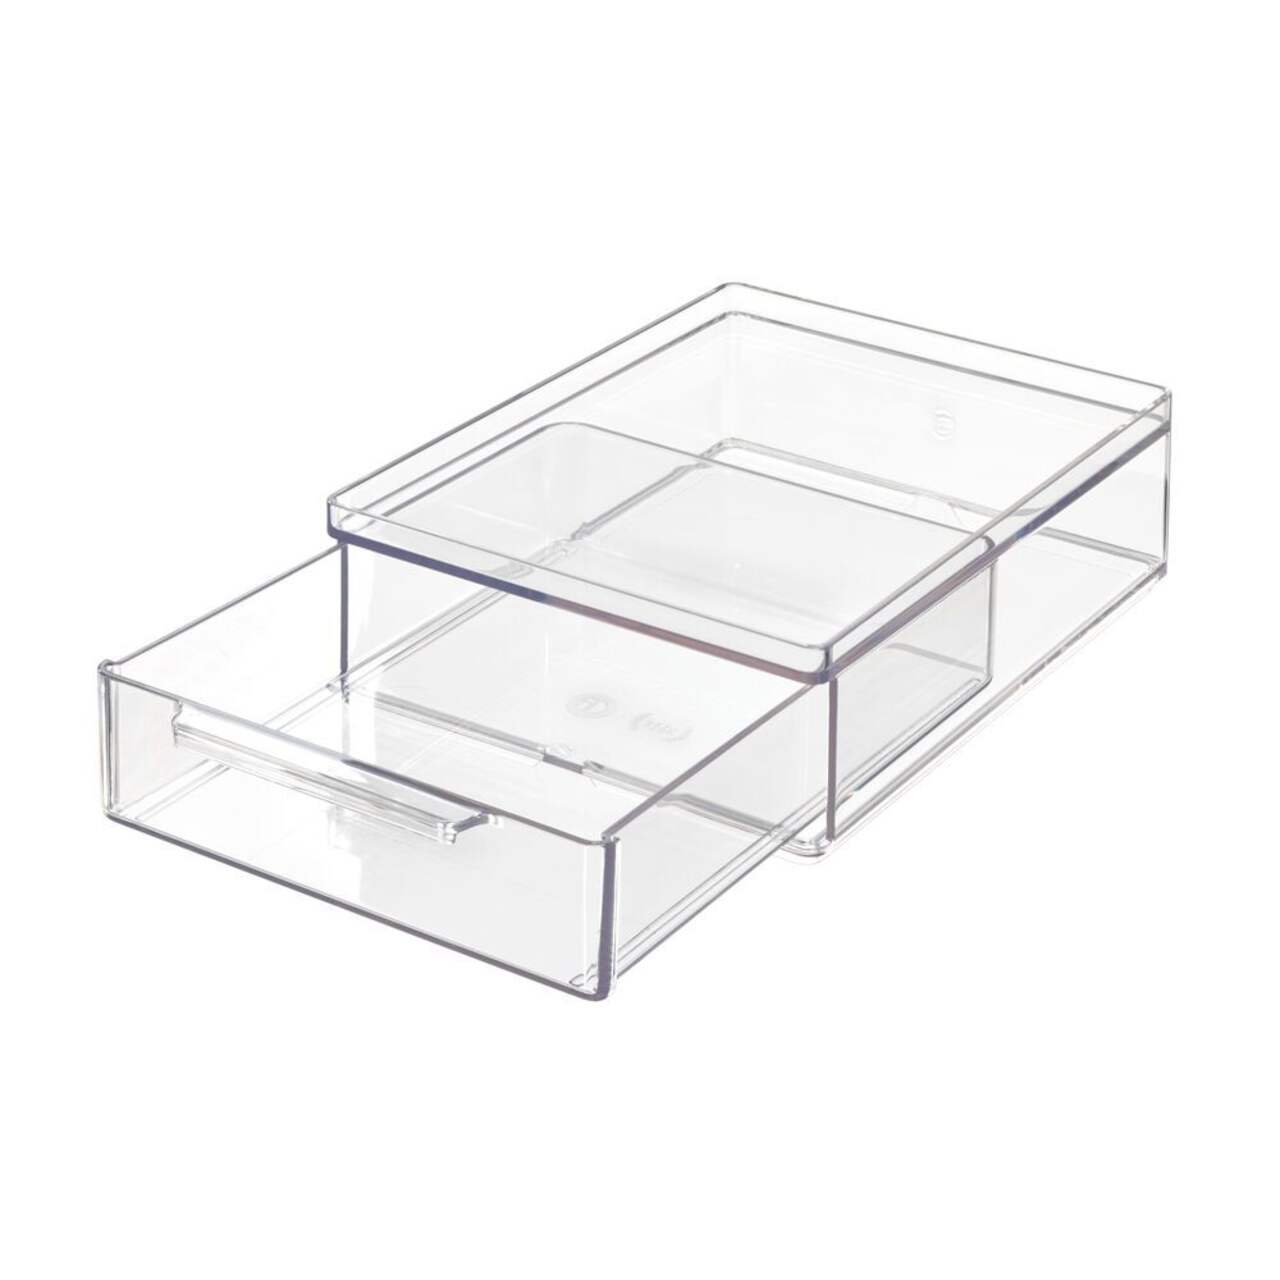 The Home Edit by iDESIGN Clear Stackable Large Shallow Organizing